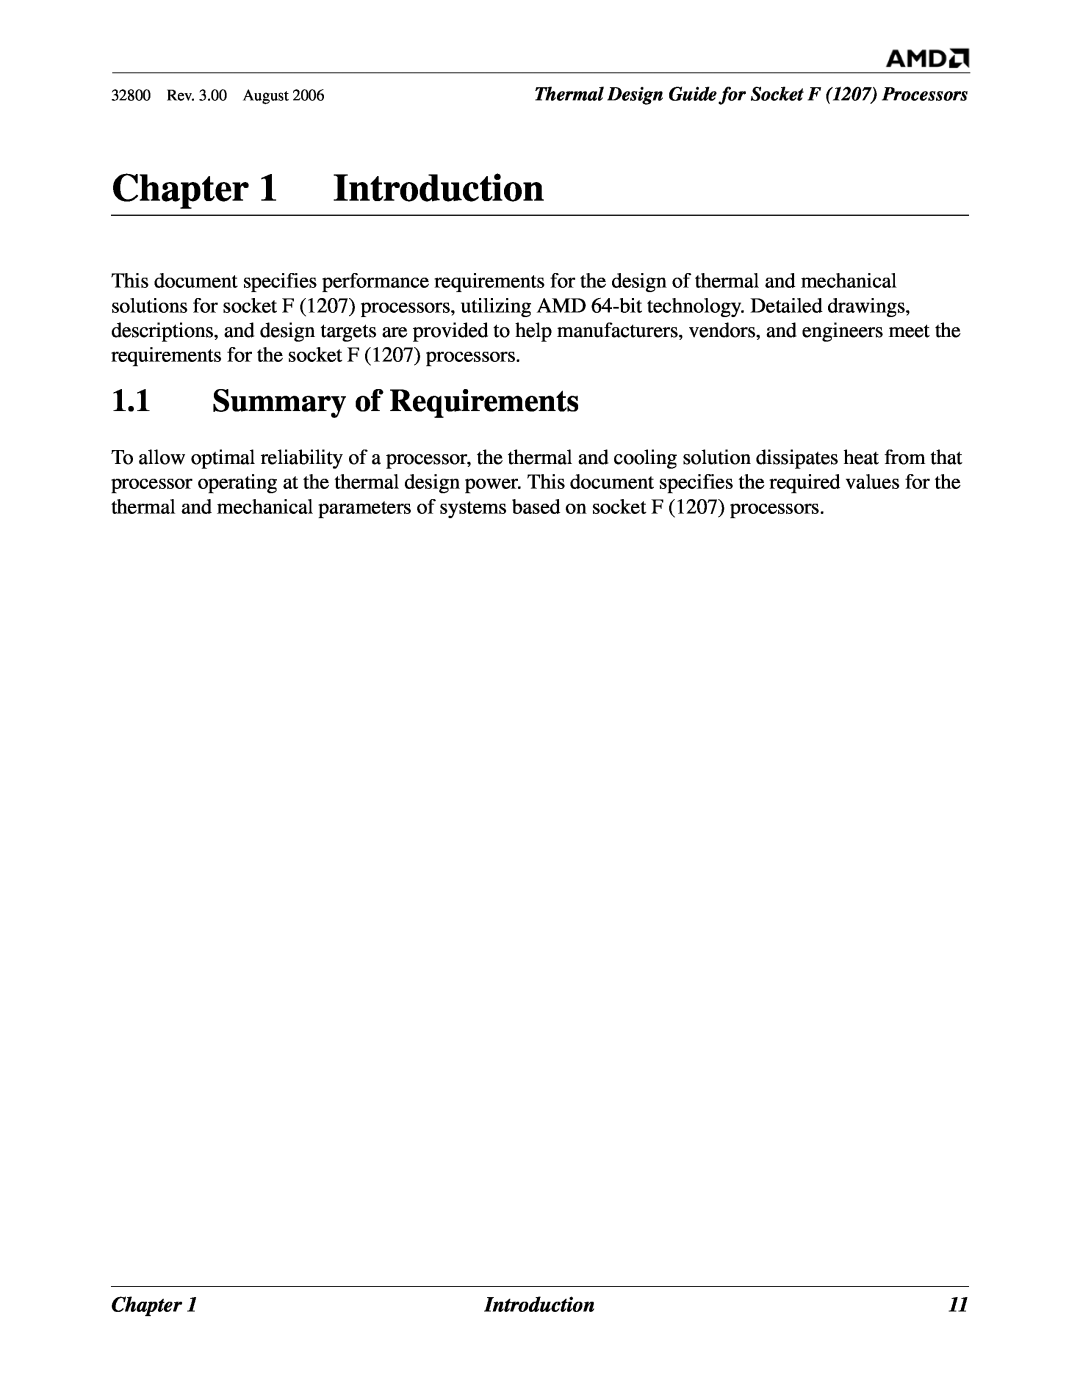 AMD 1207 manual Introduction, Summary of Requirements, Chapter 